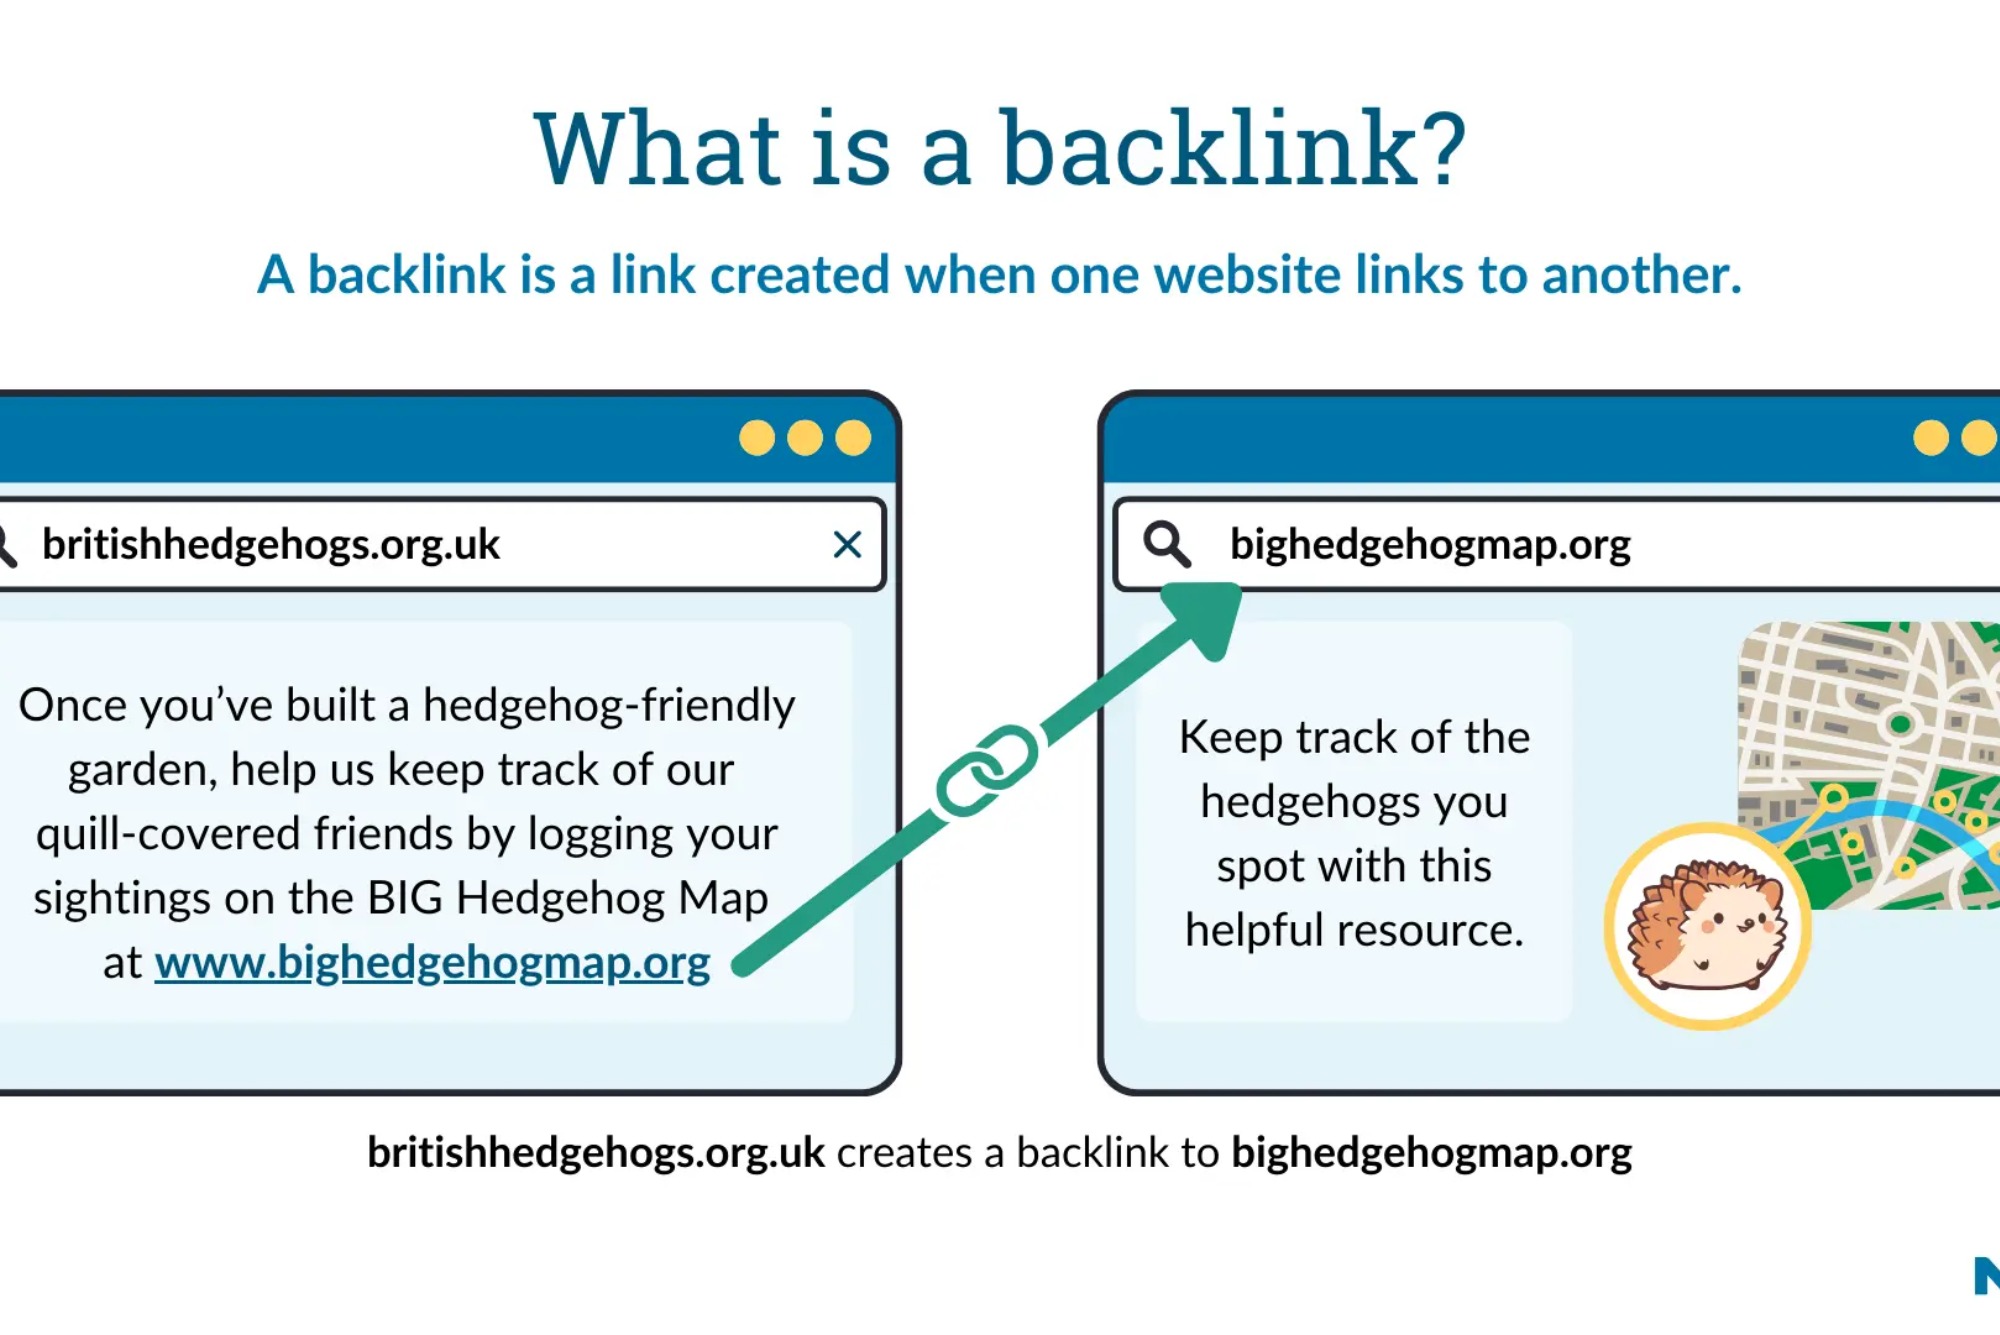 What Are Backlinks in Digital Marketing